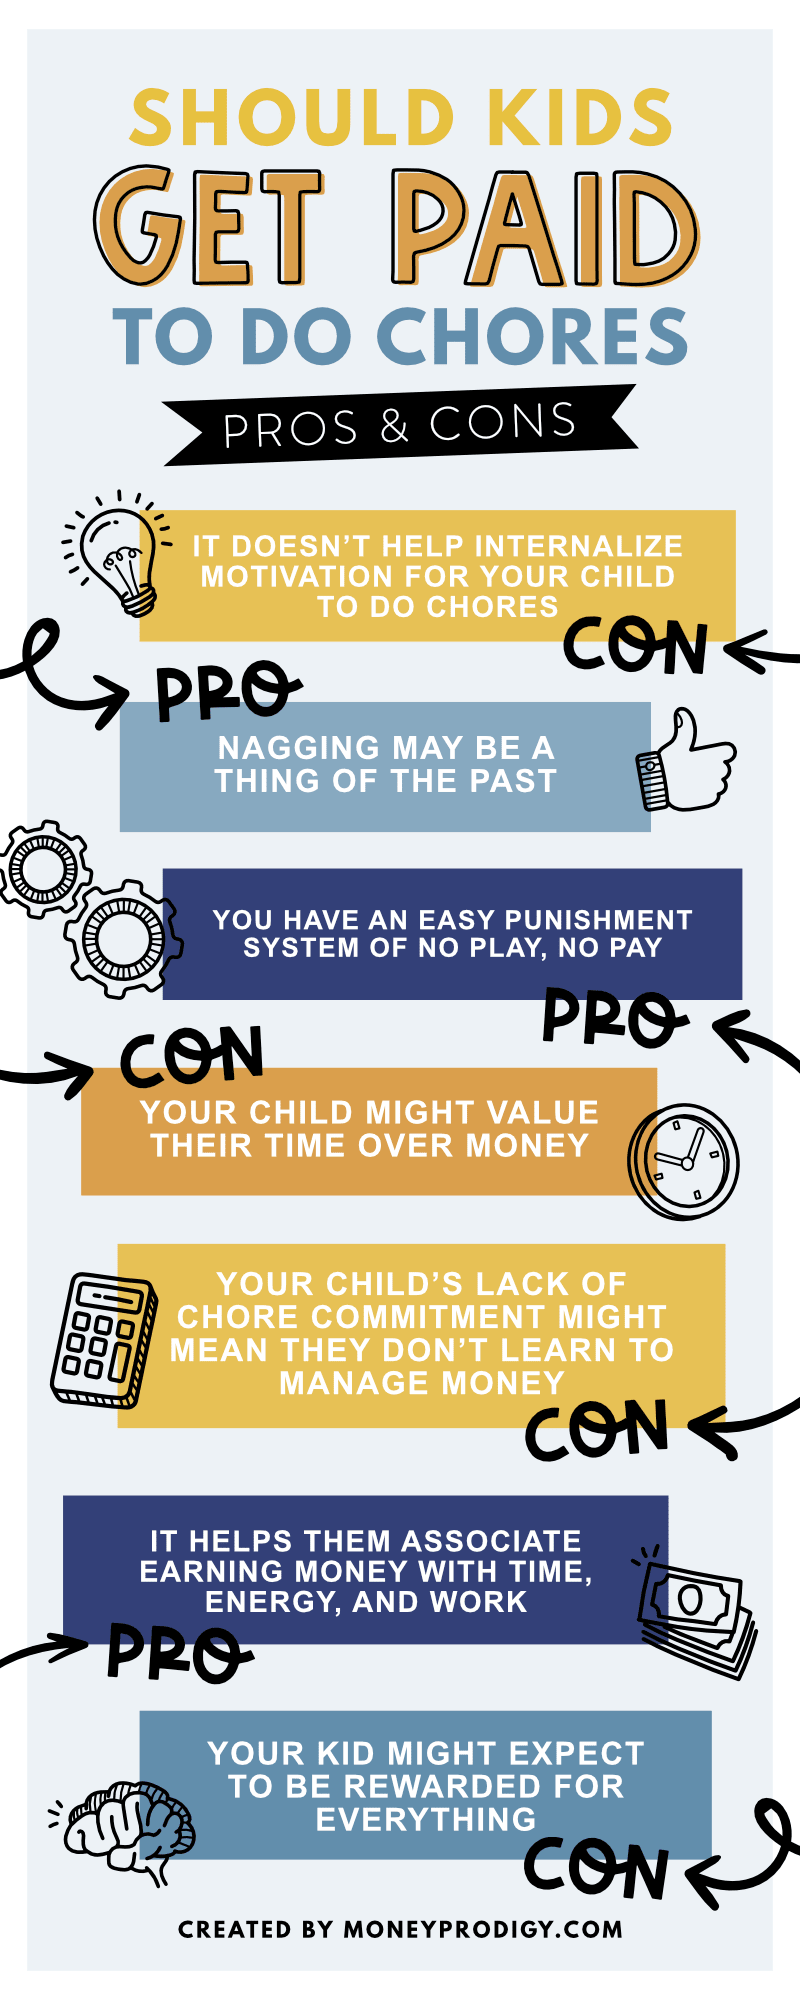 blue, orange, and black infographic listing out each of the pros and cons for getting paid for chores